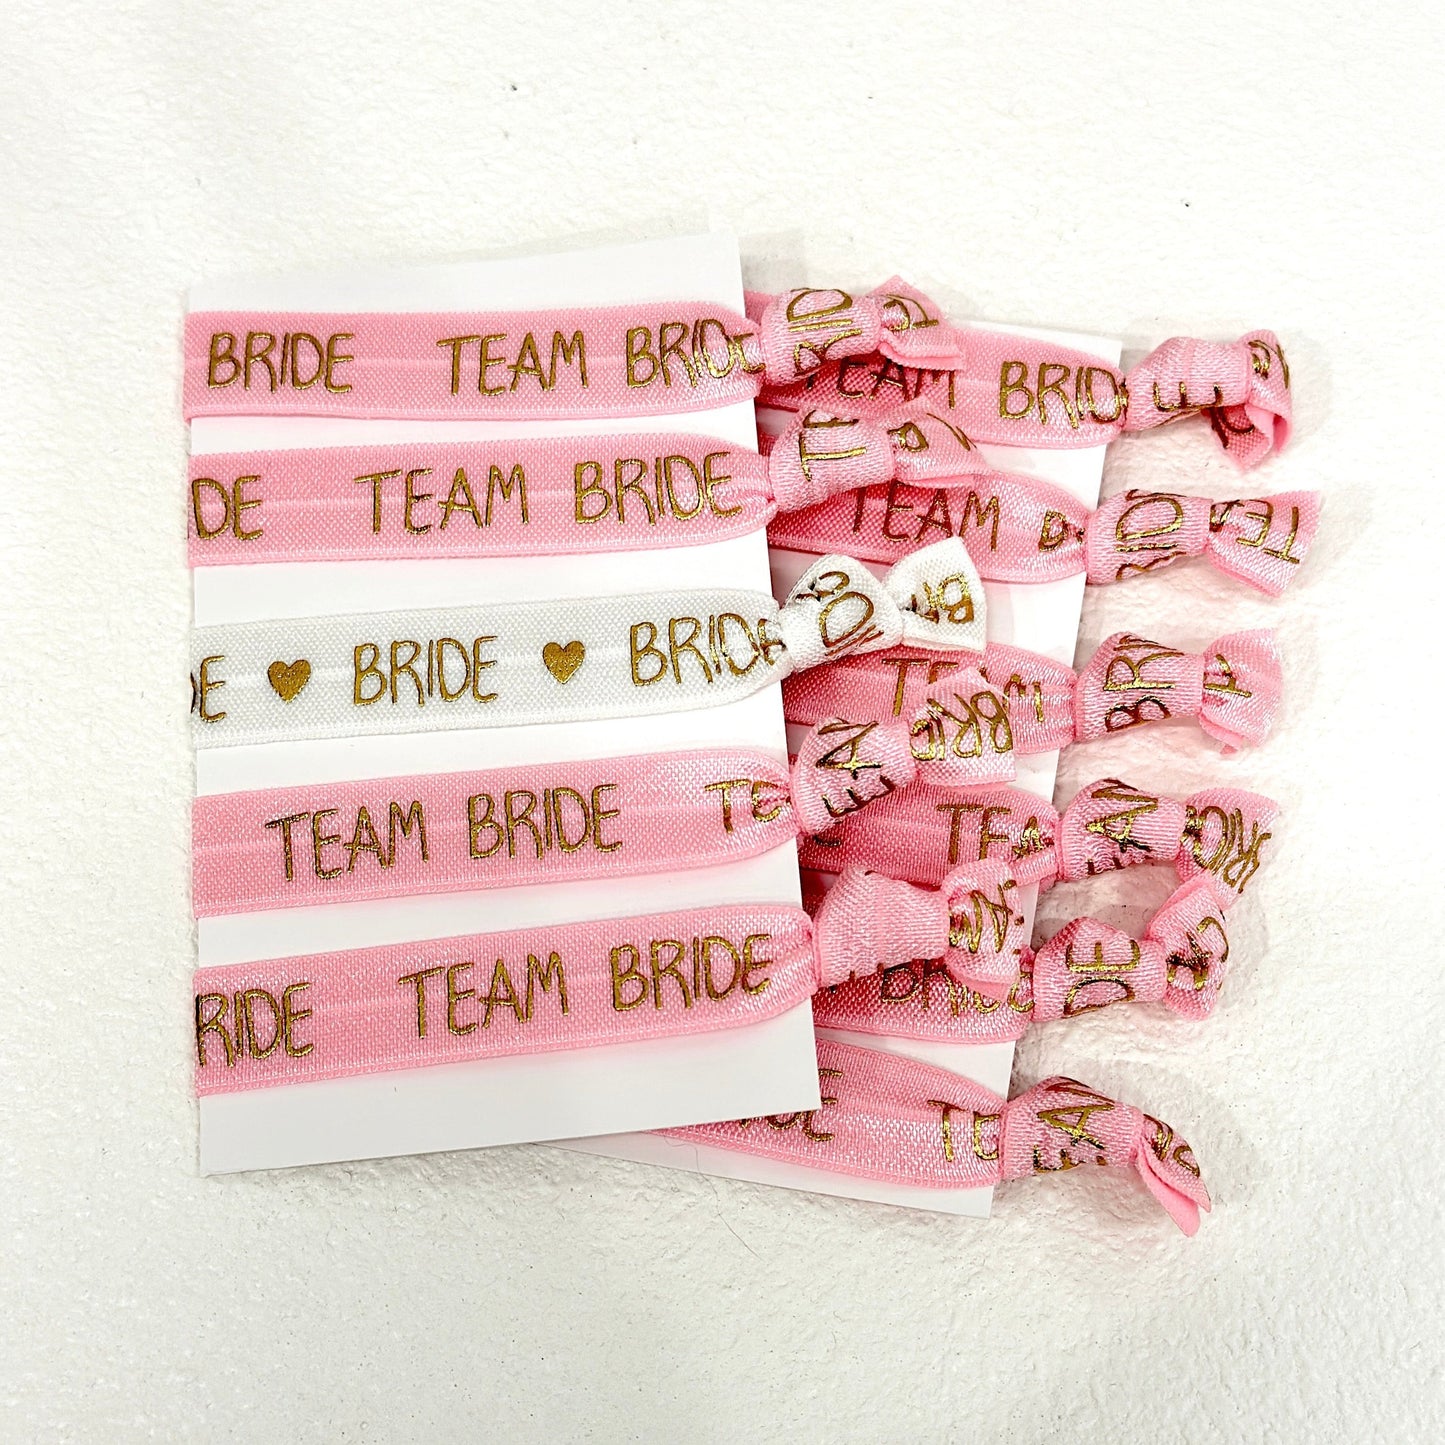 Hen's Party Wrist Bands - Pink